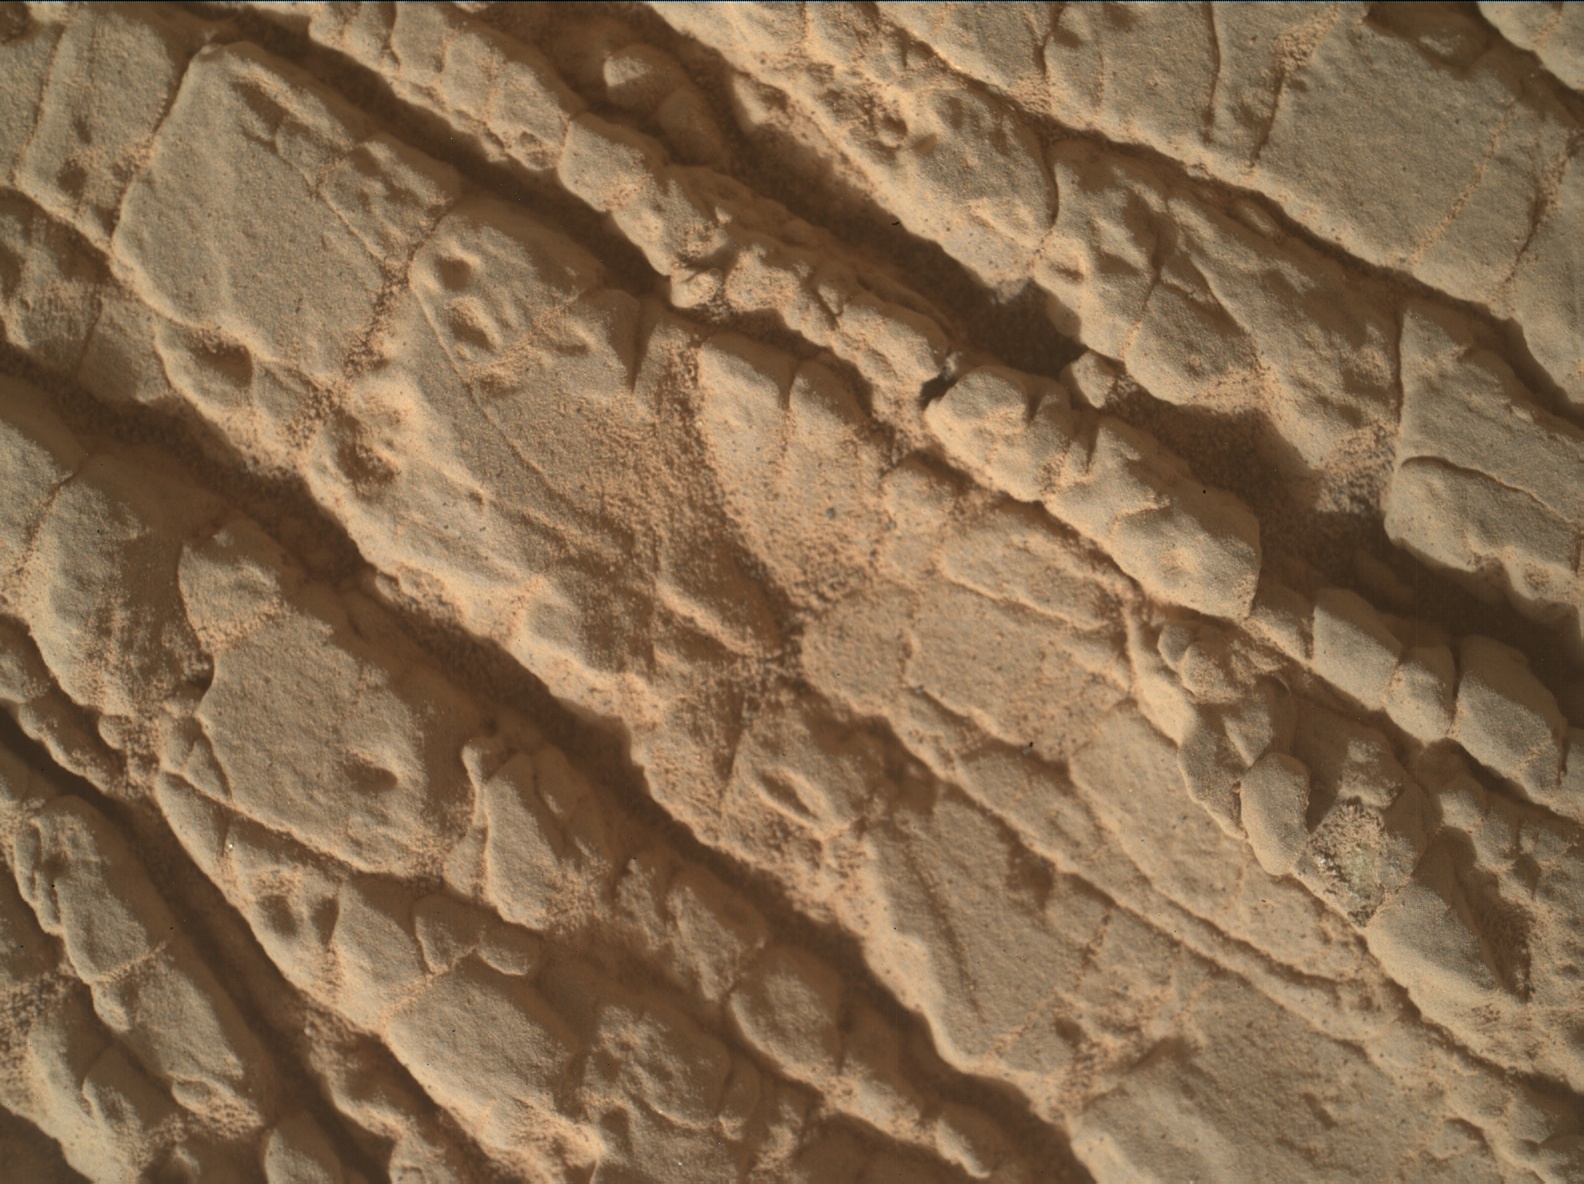 Nasa's Mars rover Curiosity acquired this image using its Mars Hand Lens Imager (MAHLI) on Sol 3534